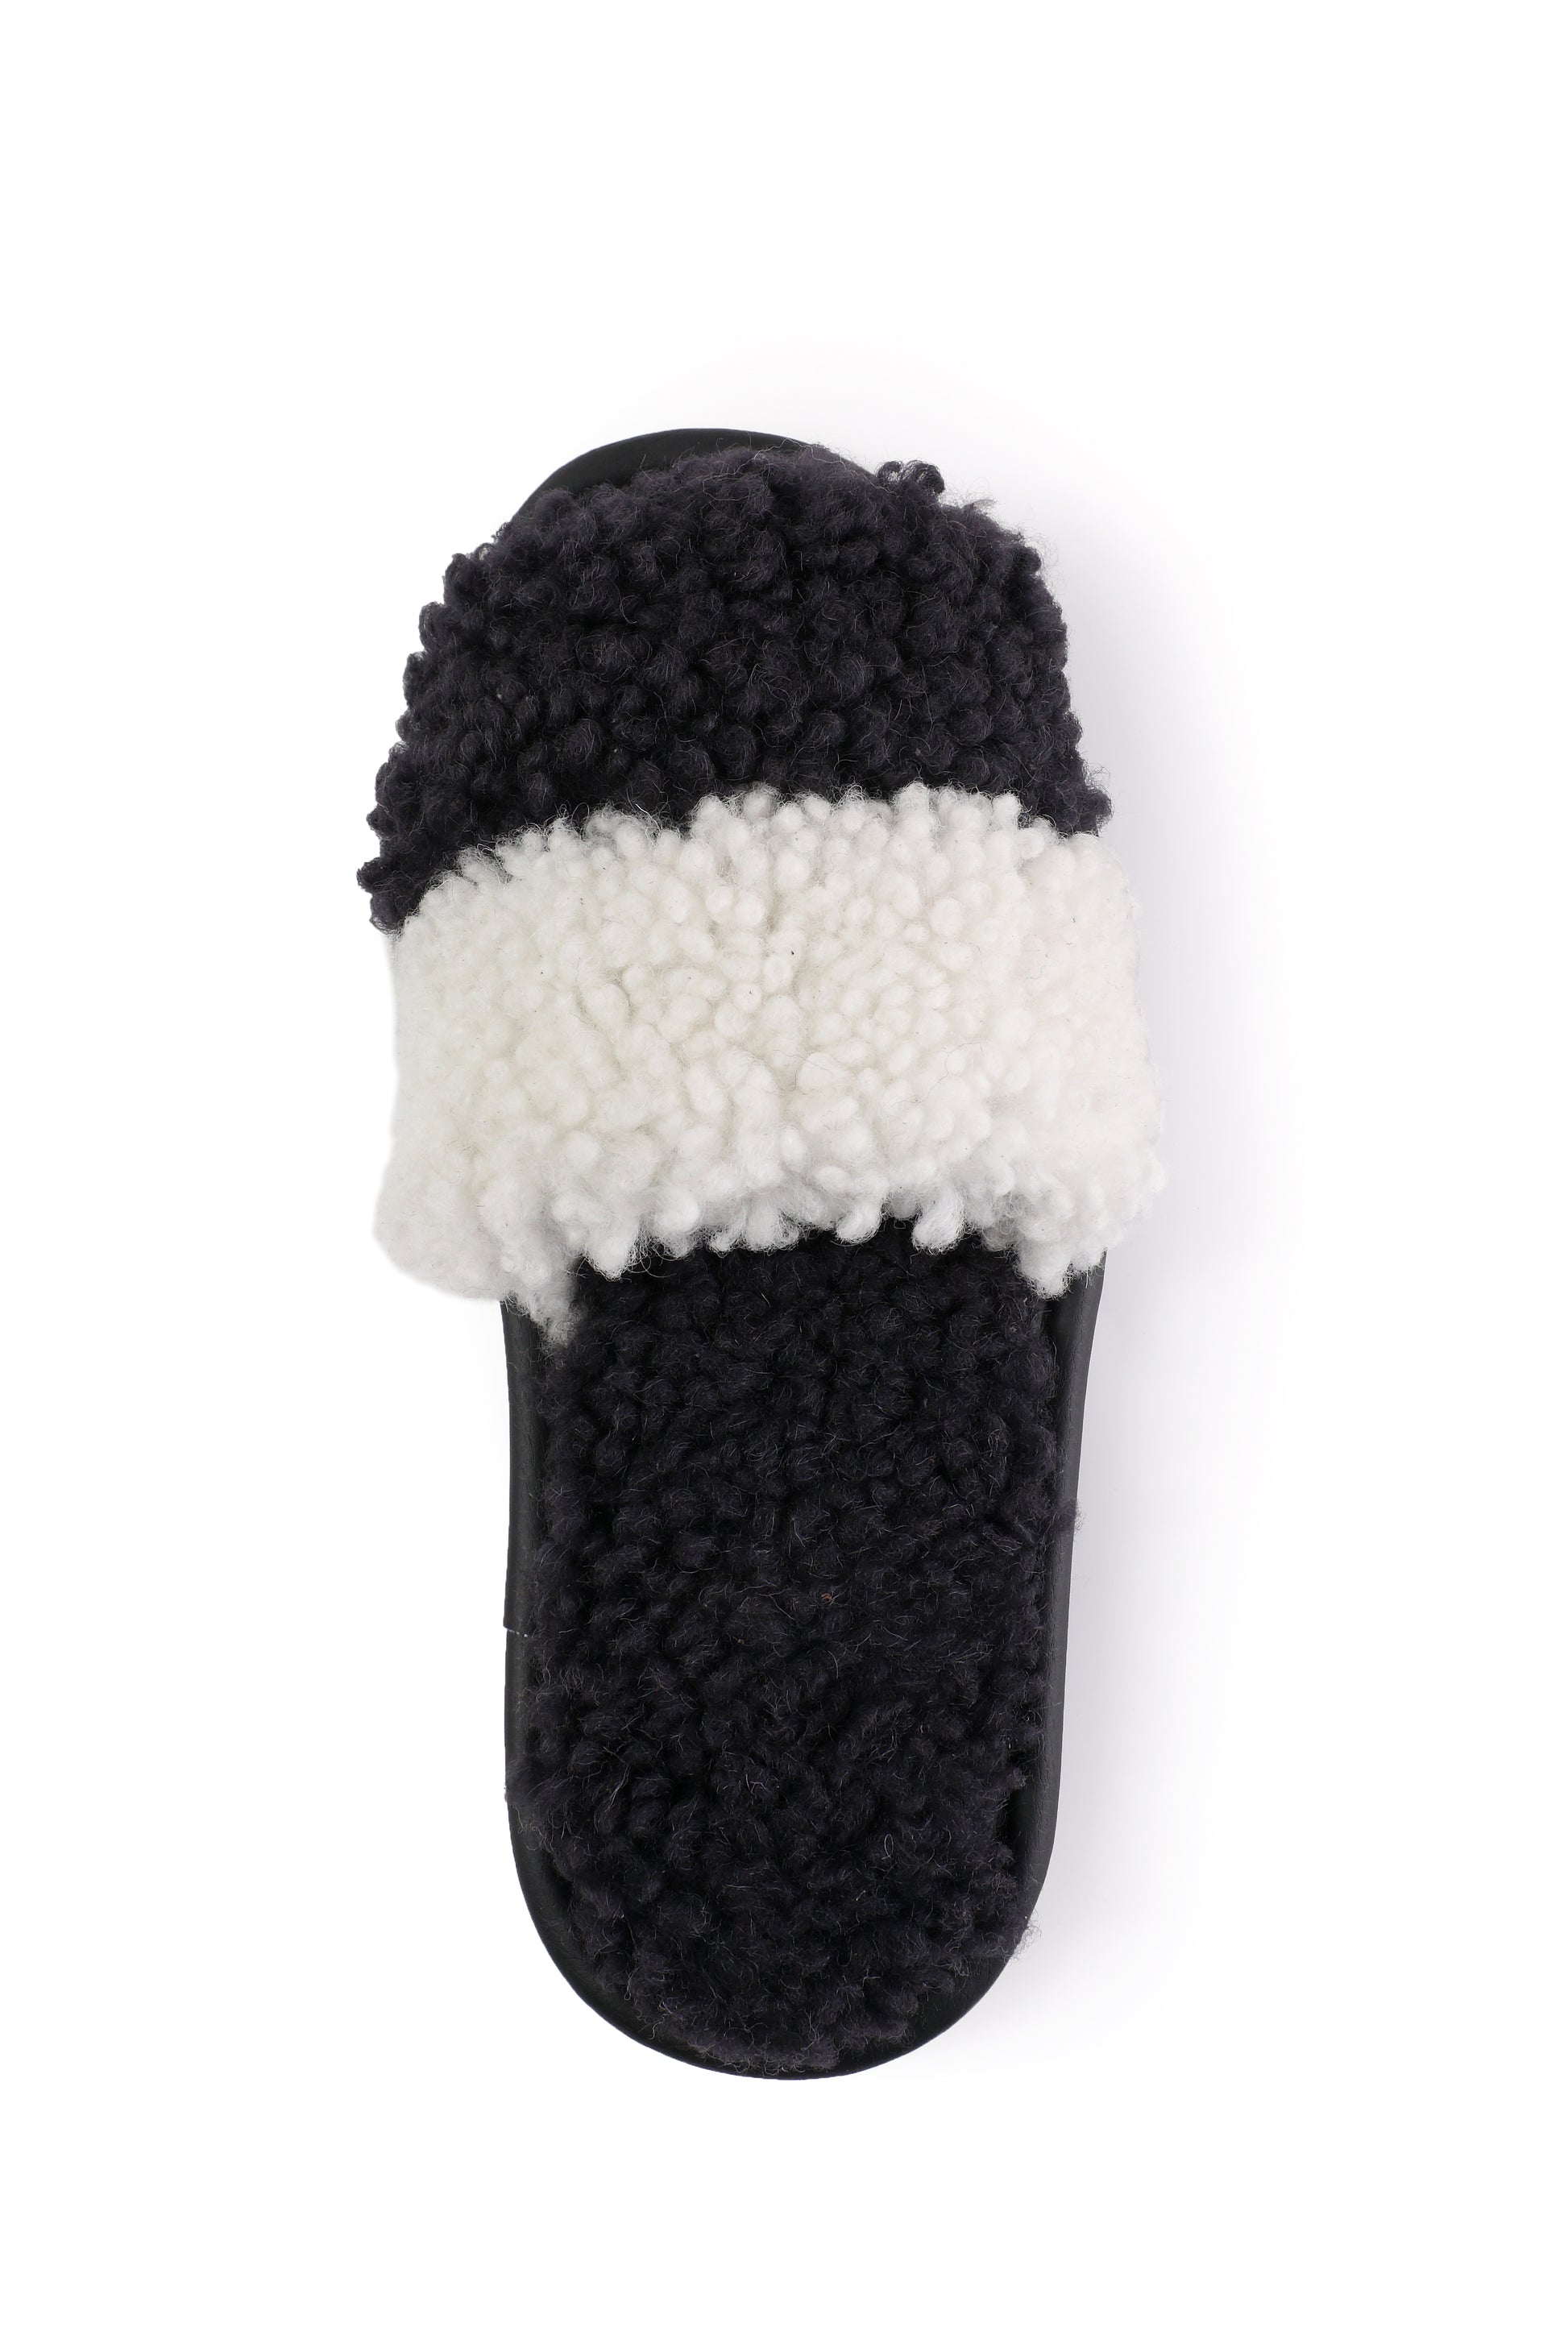 Soft Sheepskin Slippers with Black Fur Lining in Black & White Color